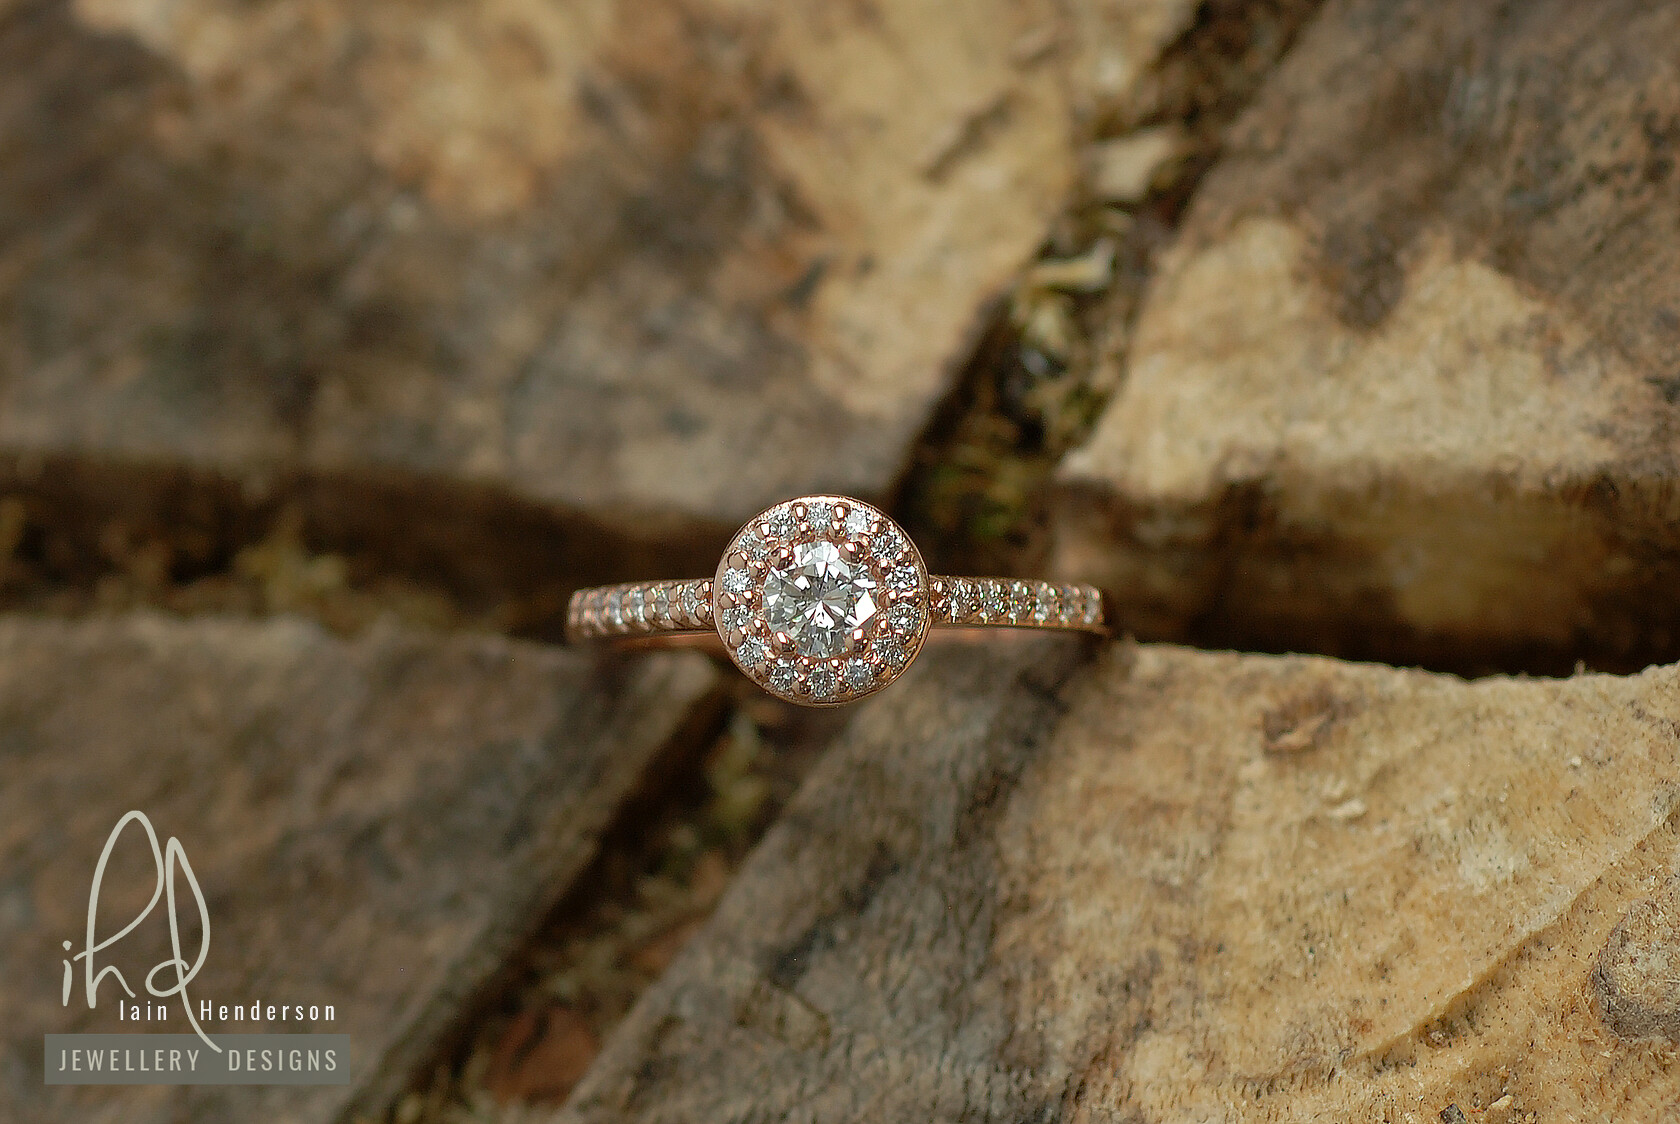 Rose gold halo engagement ring with diamonds on the shoulders